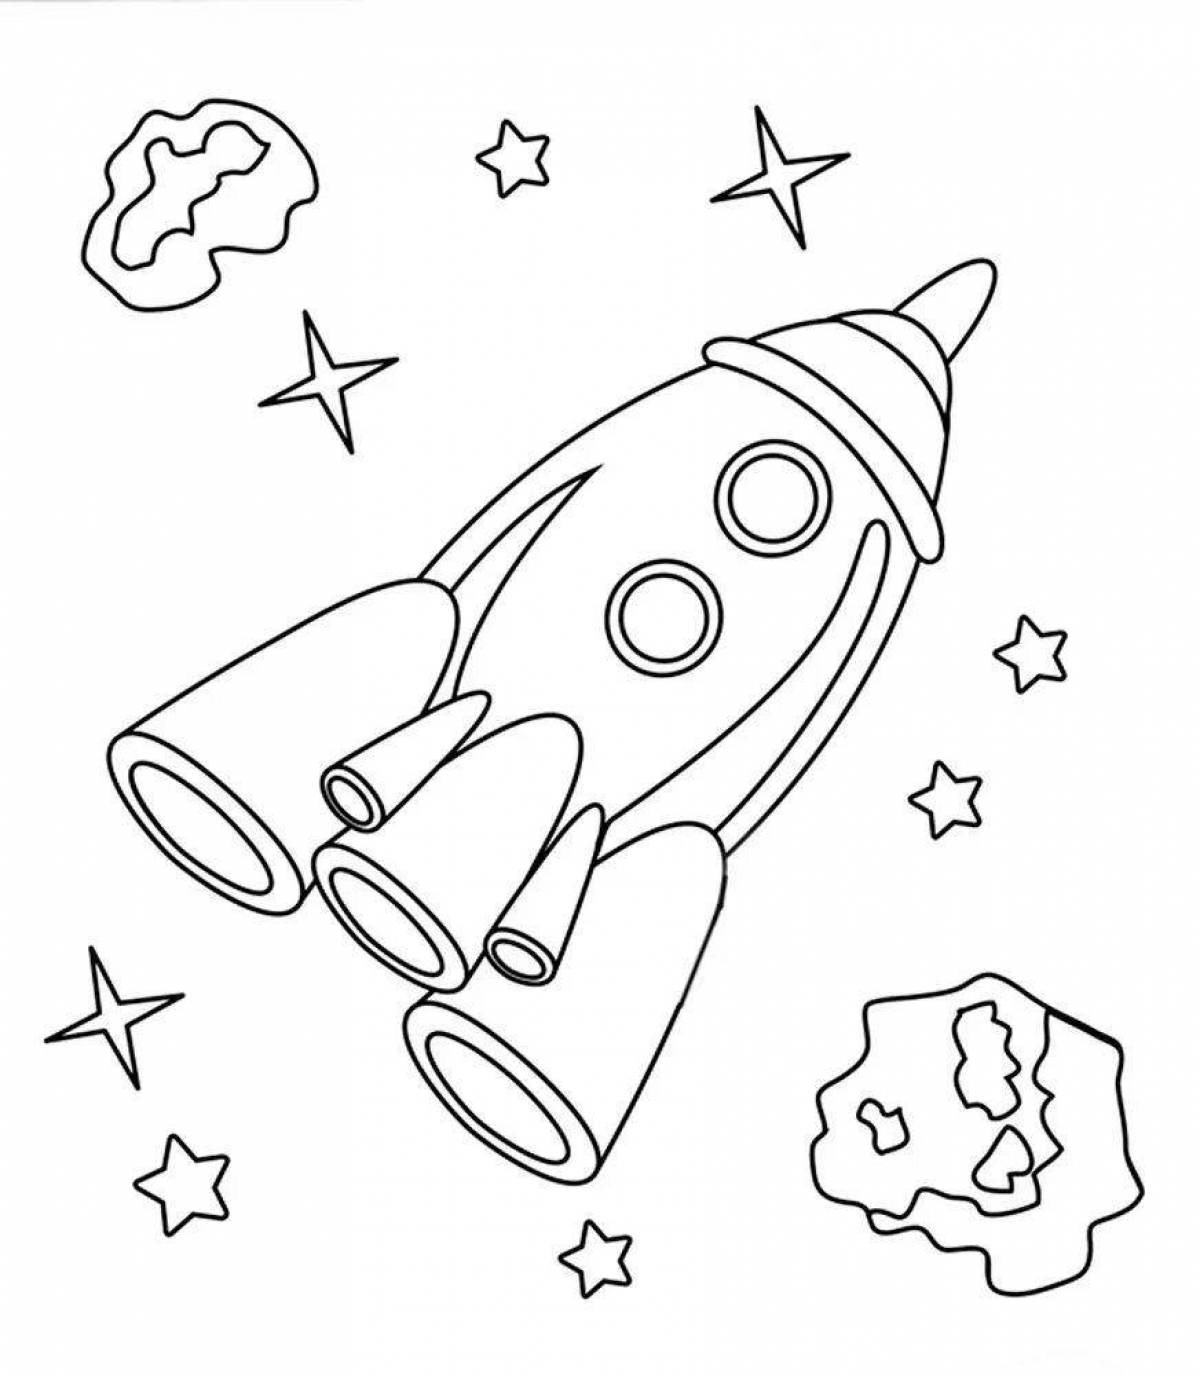 Colored rocket coloring book for boys